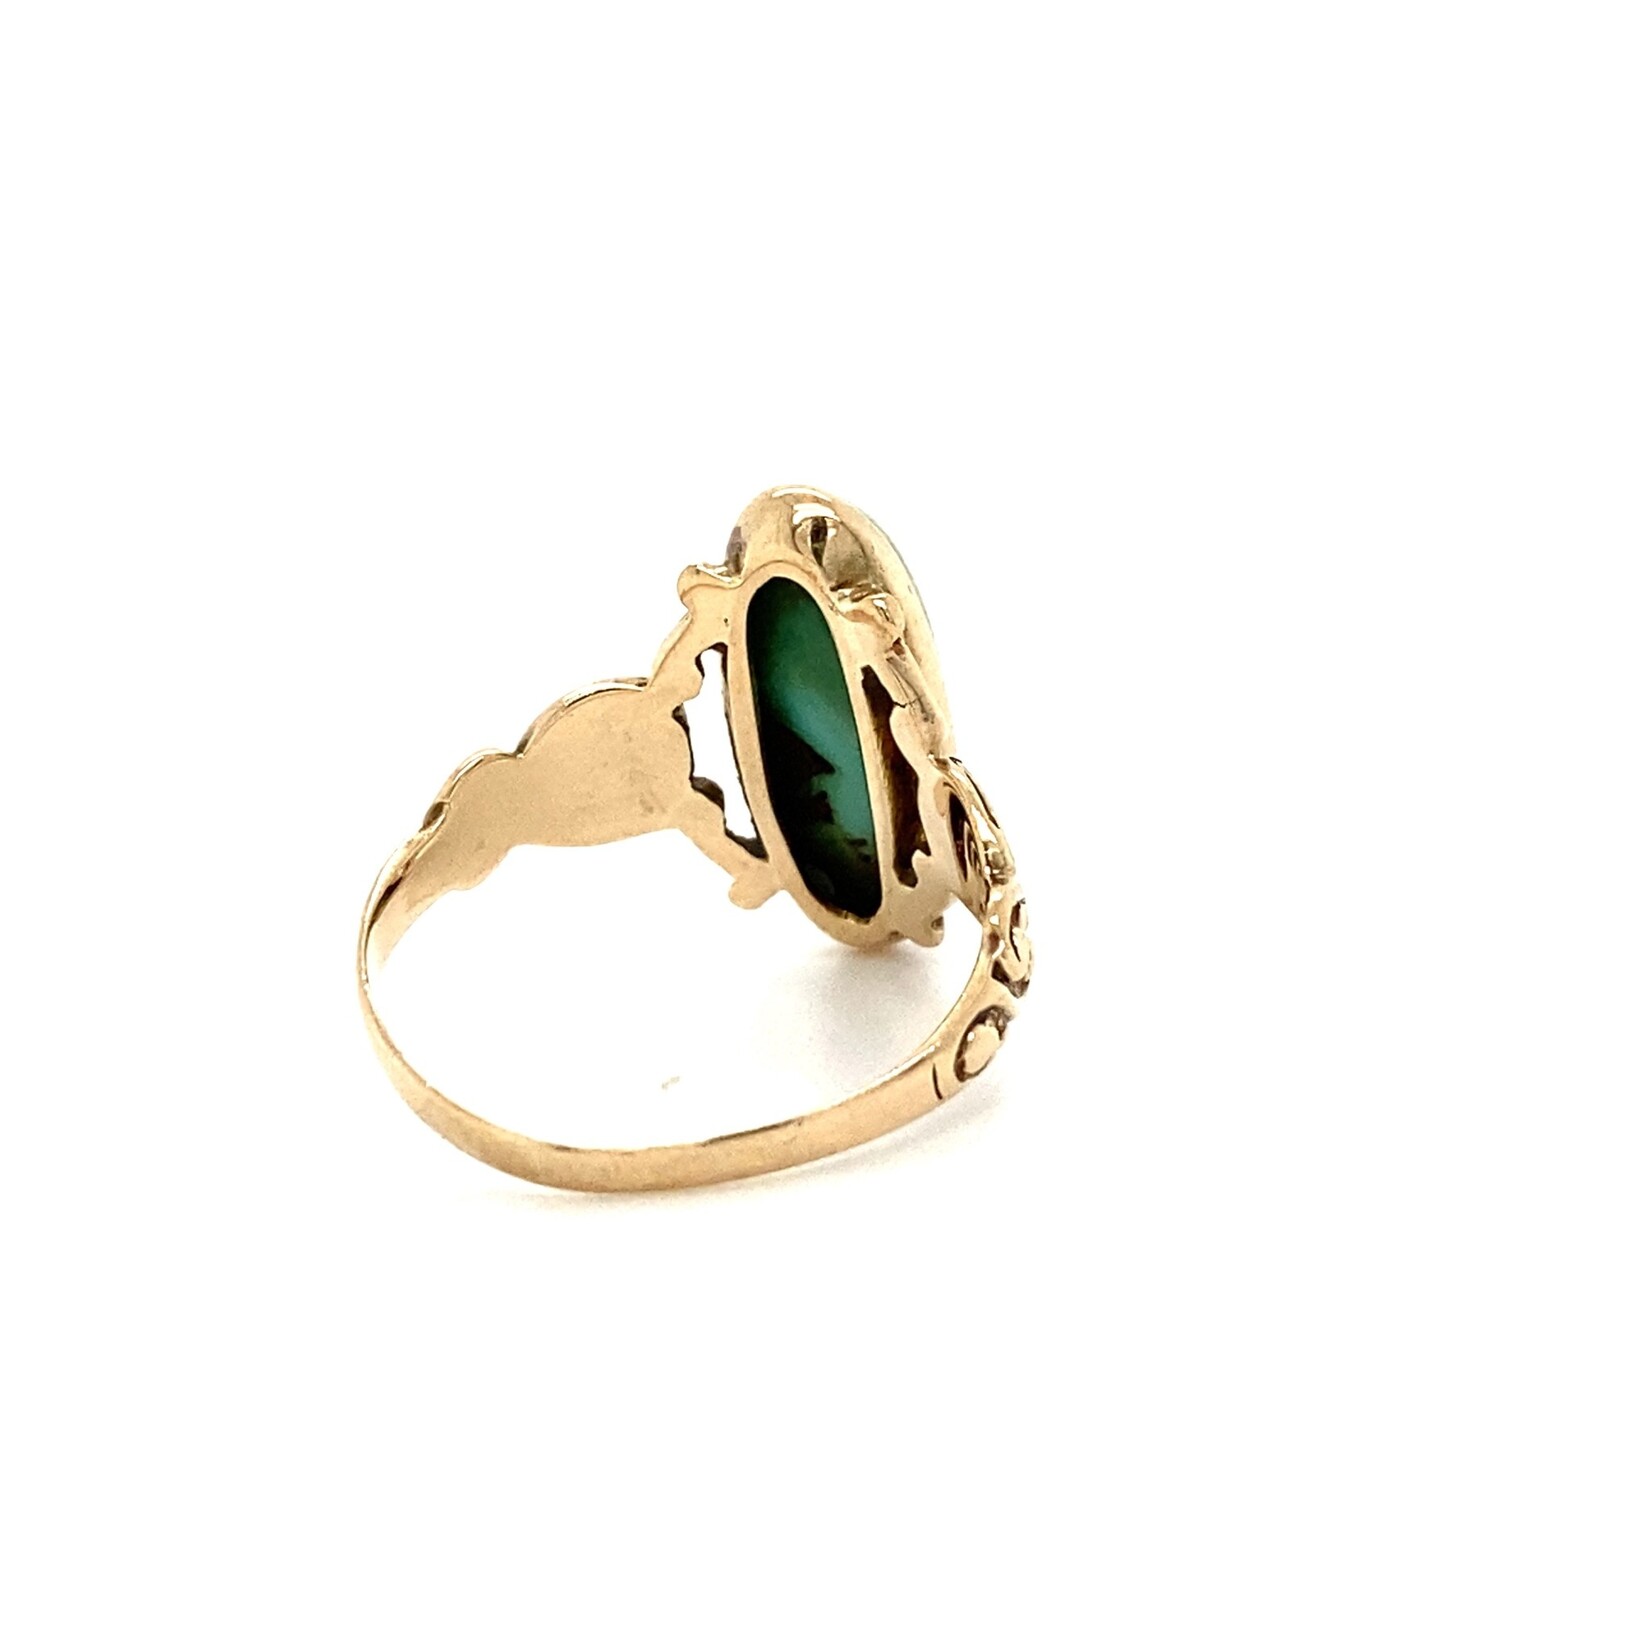 13K Yellow Gold Turquoise Ring size 5.25